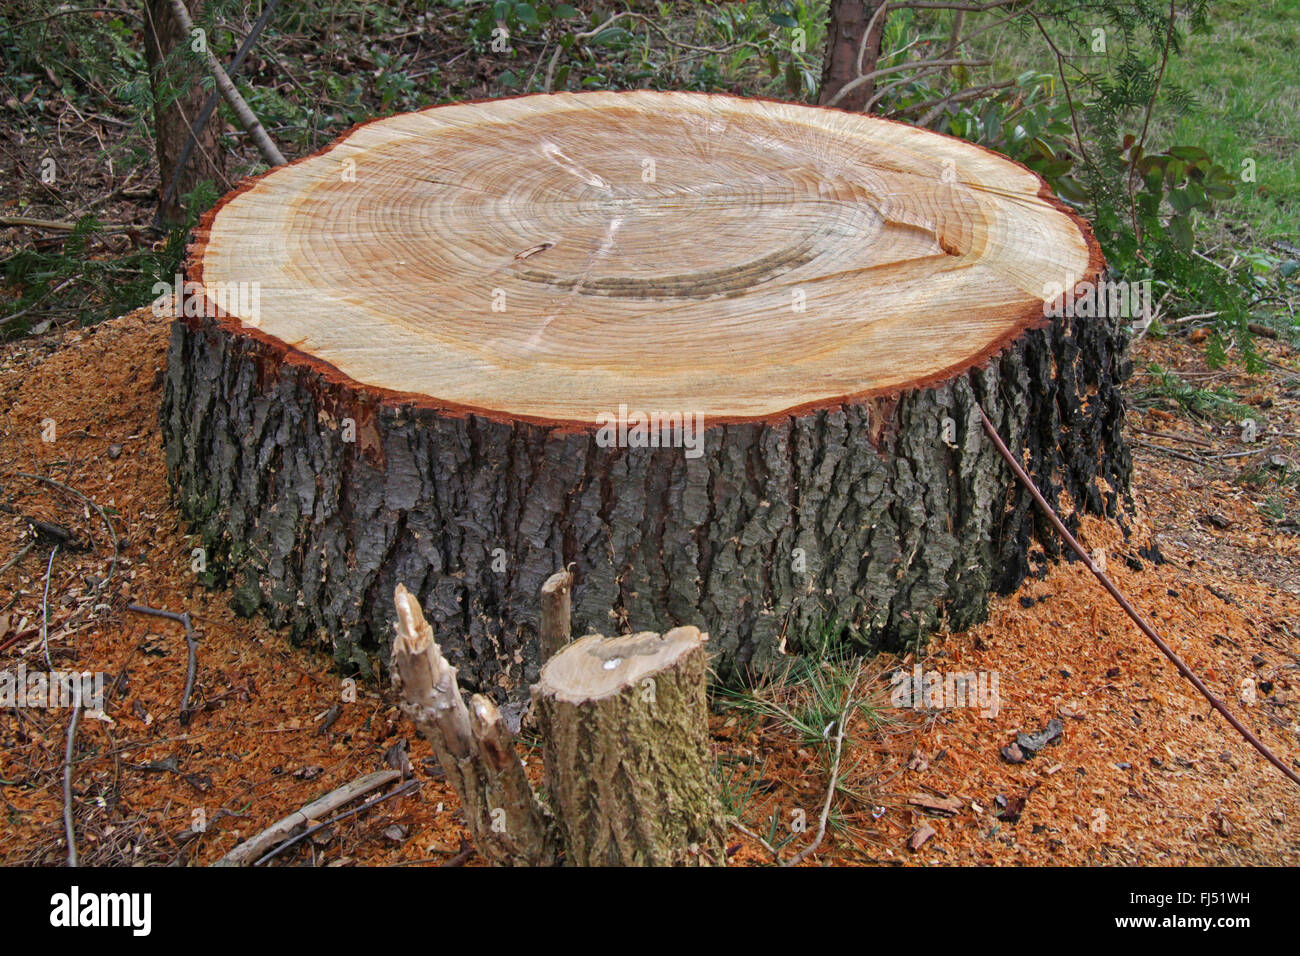 Norway spruce (Picea abies), sawed off tree stump, Germany Stock Photo